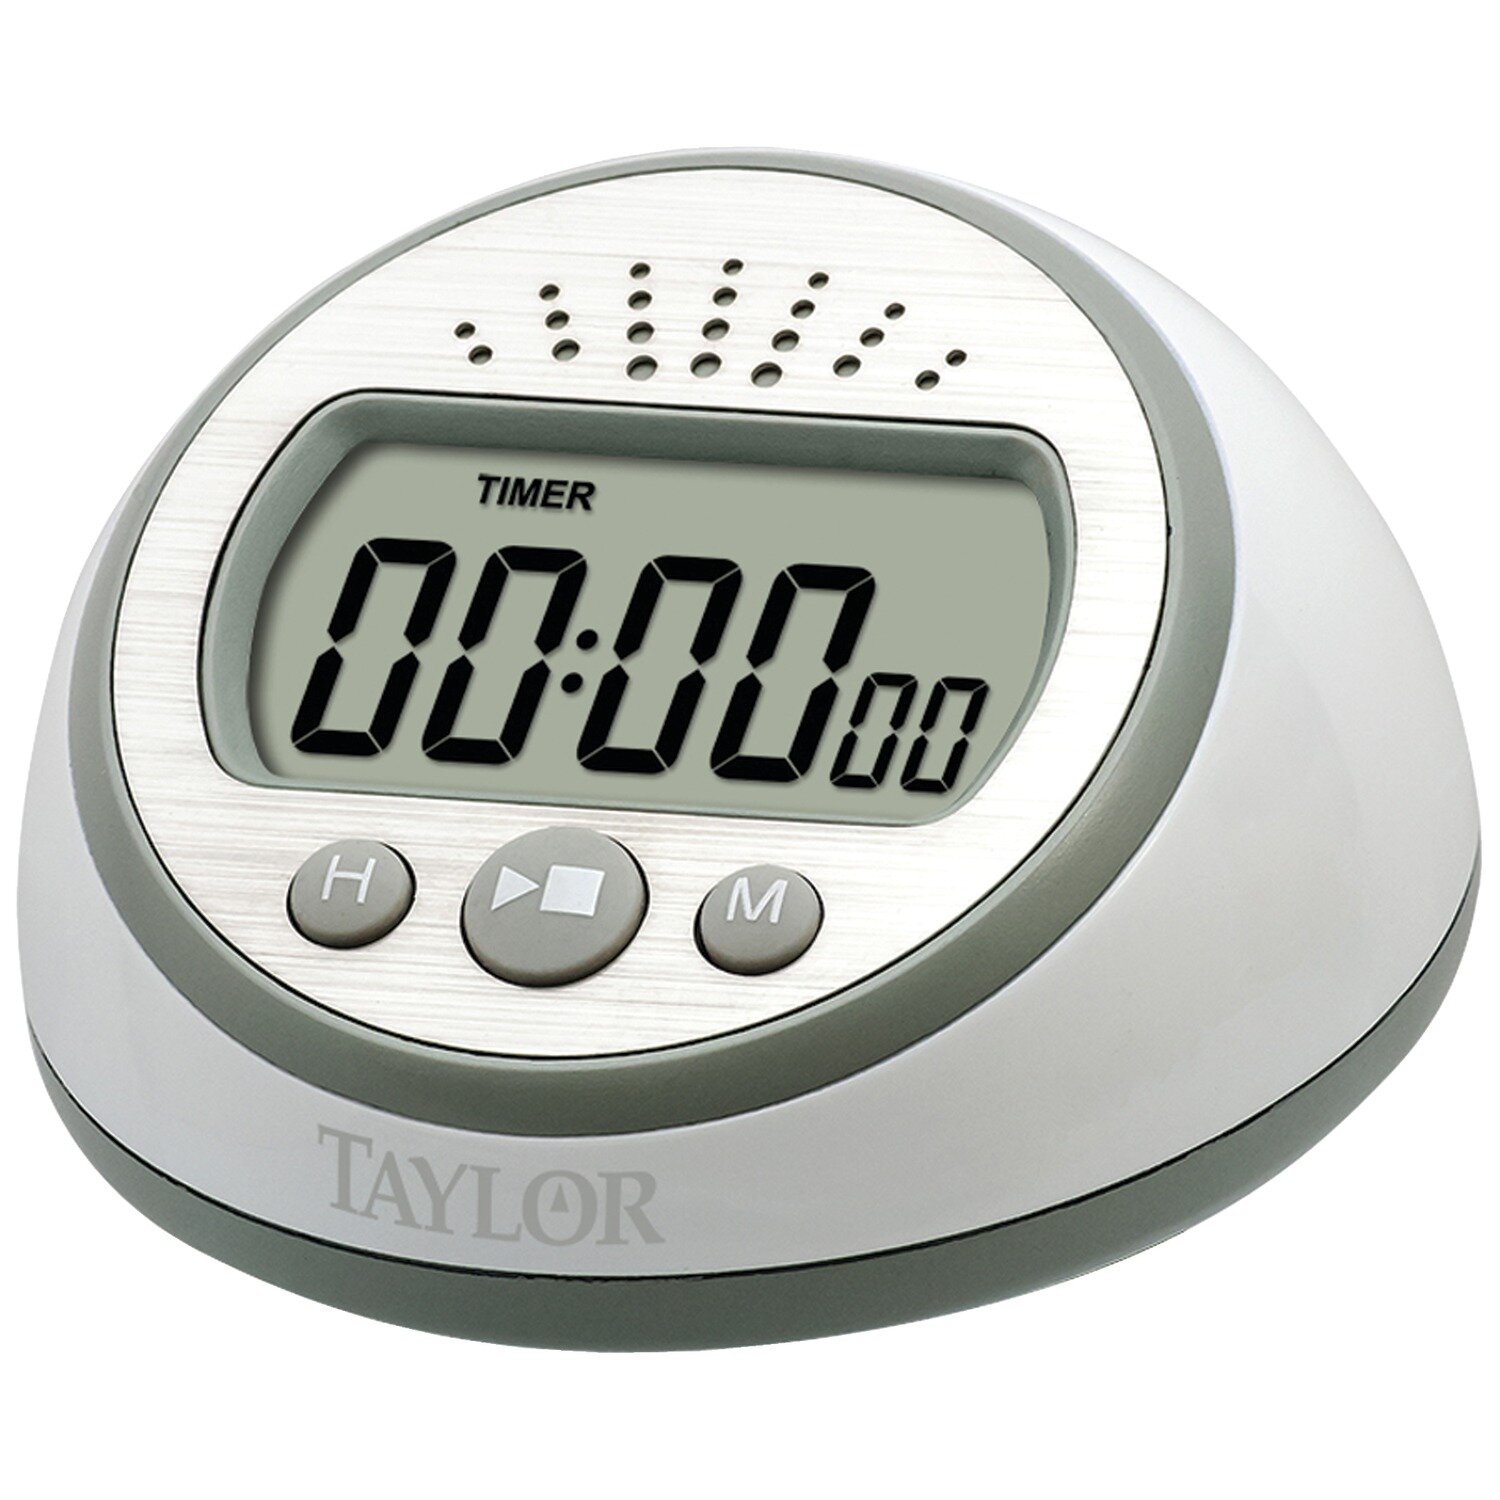 Taylor 5265191 Digital Indoor/Outdoor Clock w/ Thermometer, Calendar, Moon Phase Digital Kitchen Timer